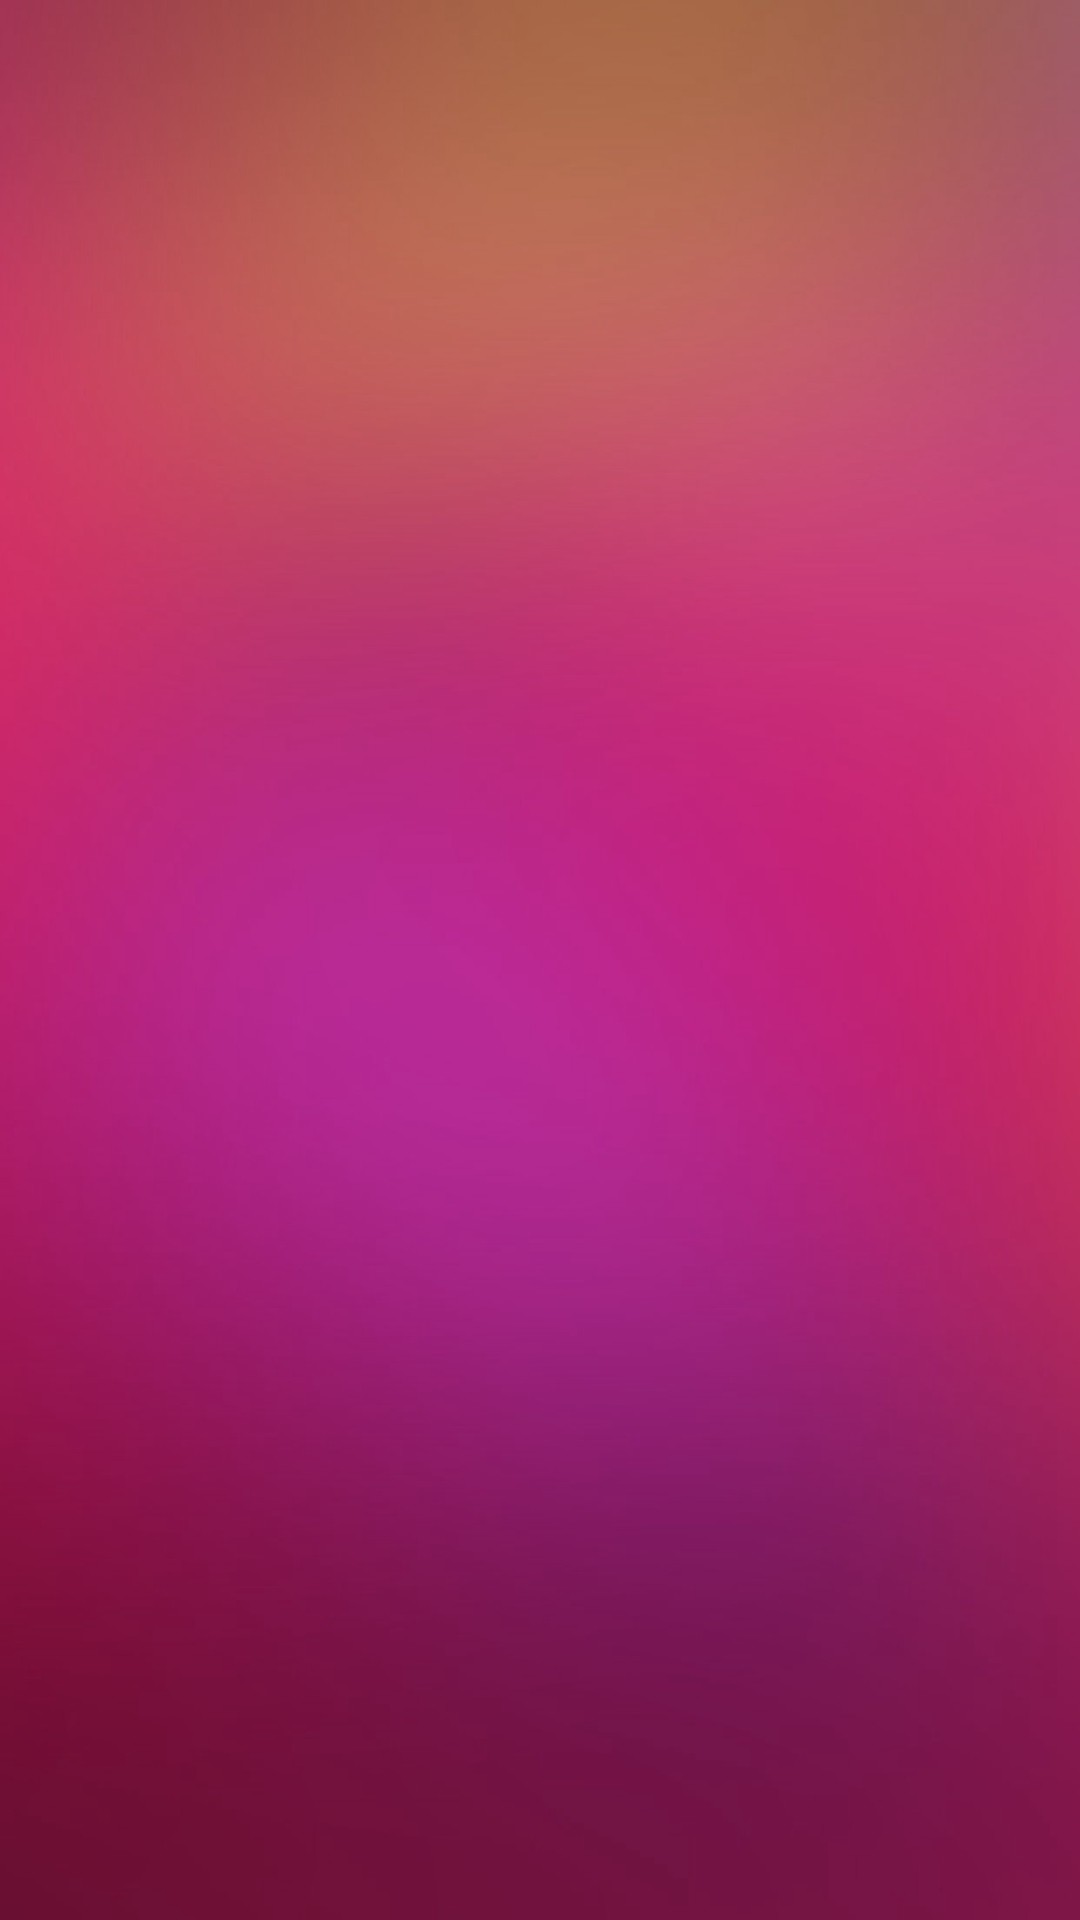 1080x1920 Explore Pink Wallpaper For Iphone and more!